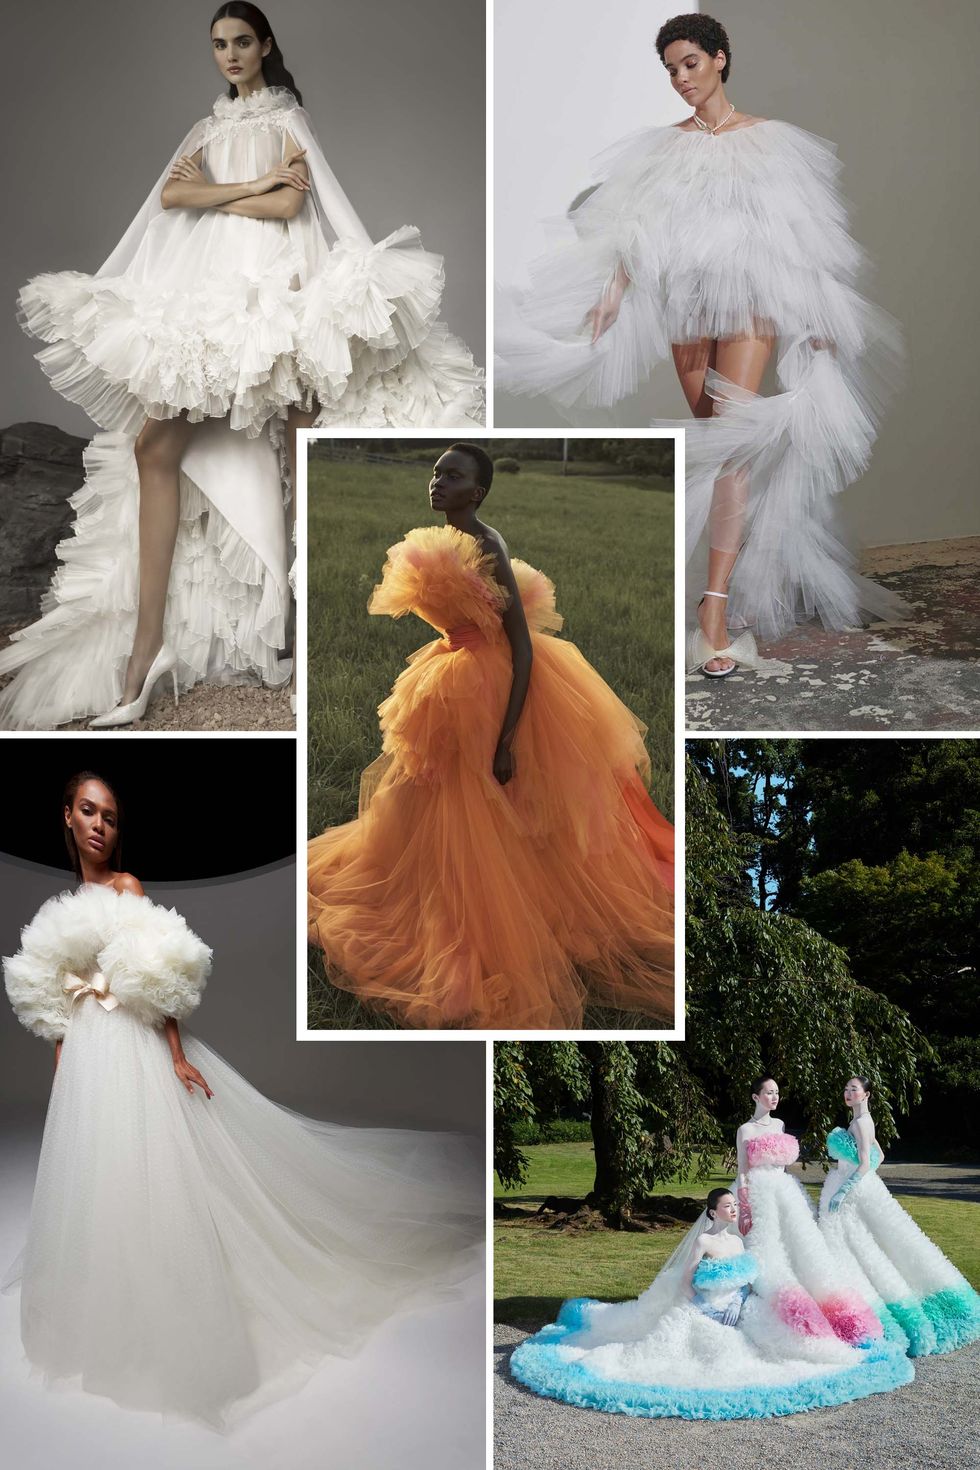 The Top 12 Bridal Trends For Fall 2021 - Fashionista